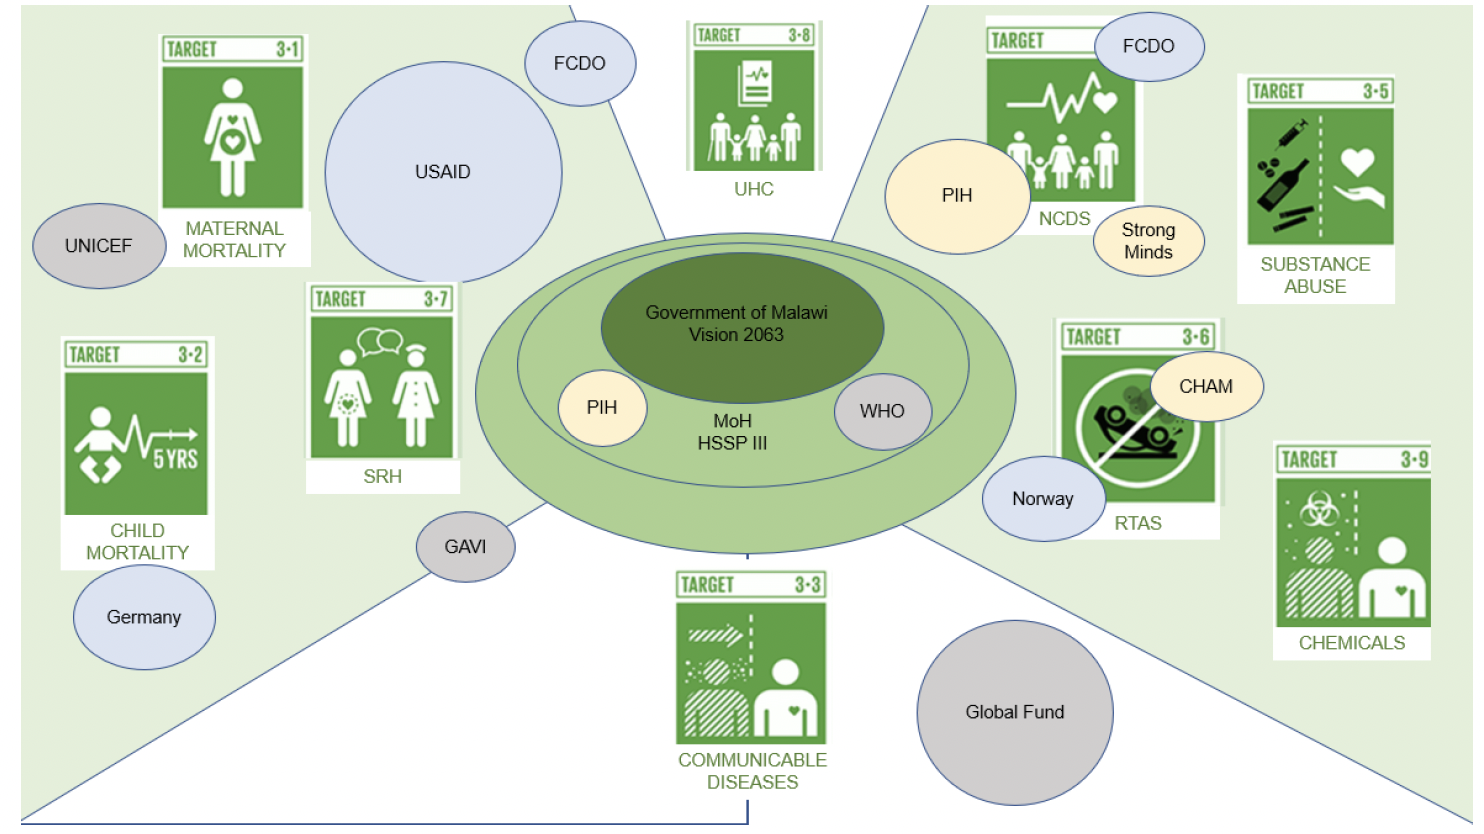 Diagram showing stakeholder mapping in Malawi.